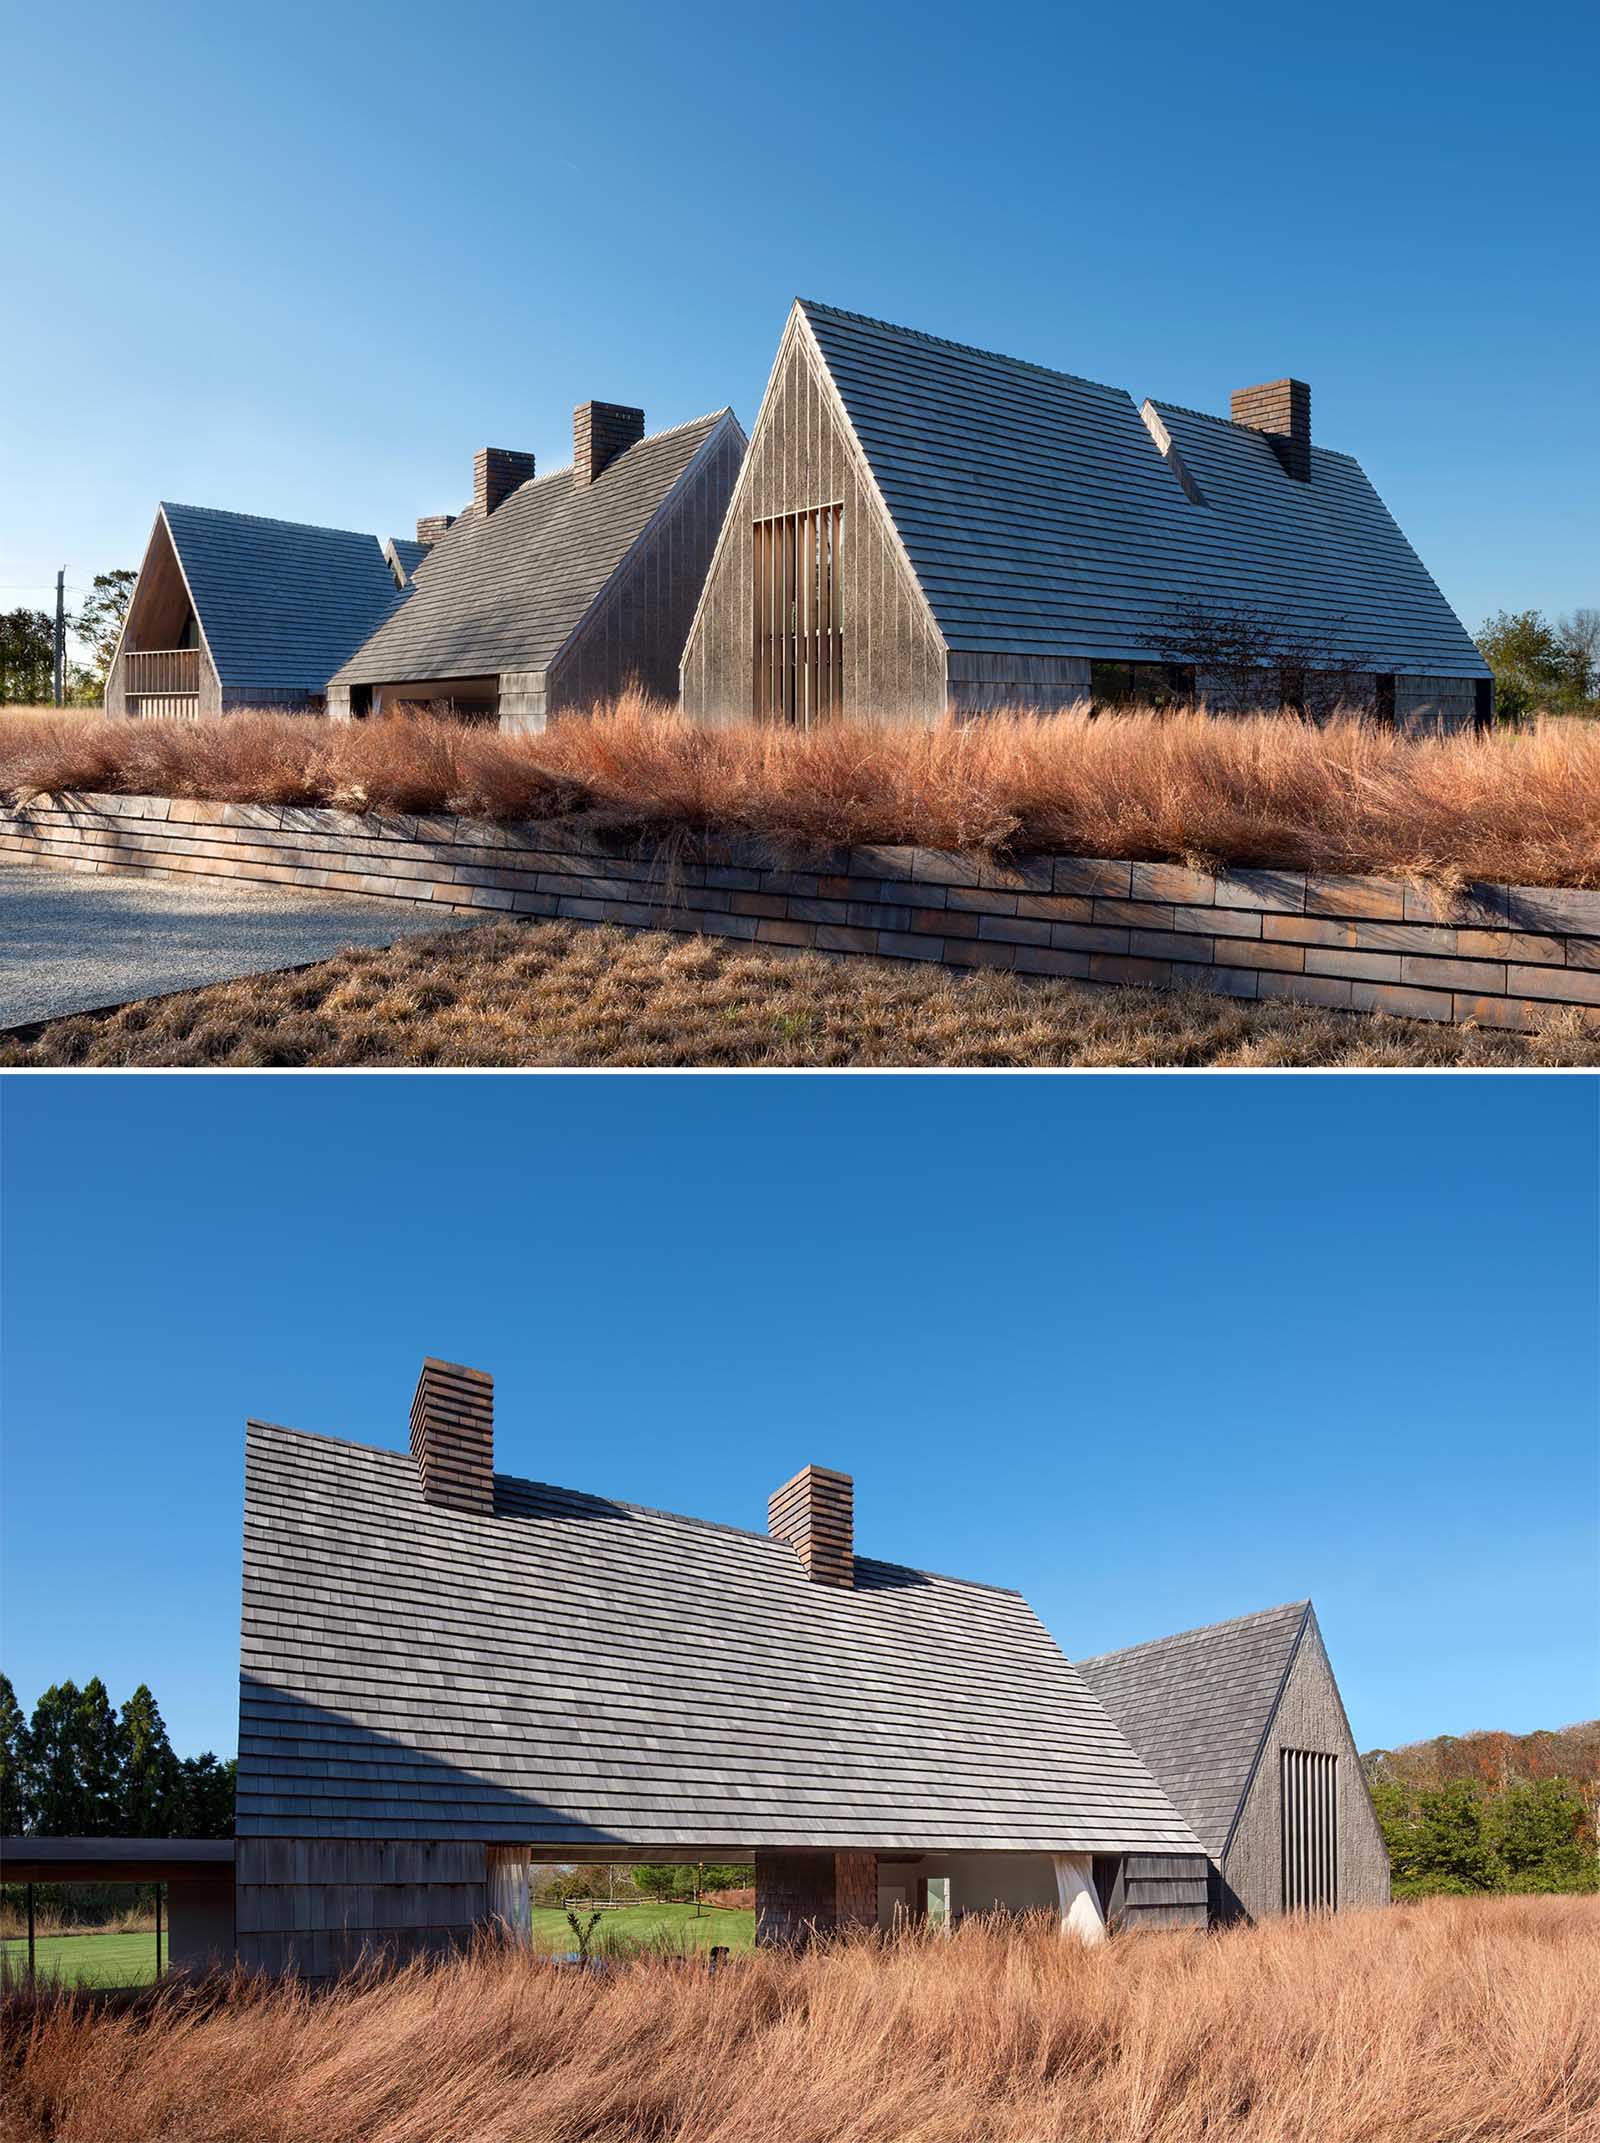 The weathered wood shingle siding that covers this modern home.